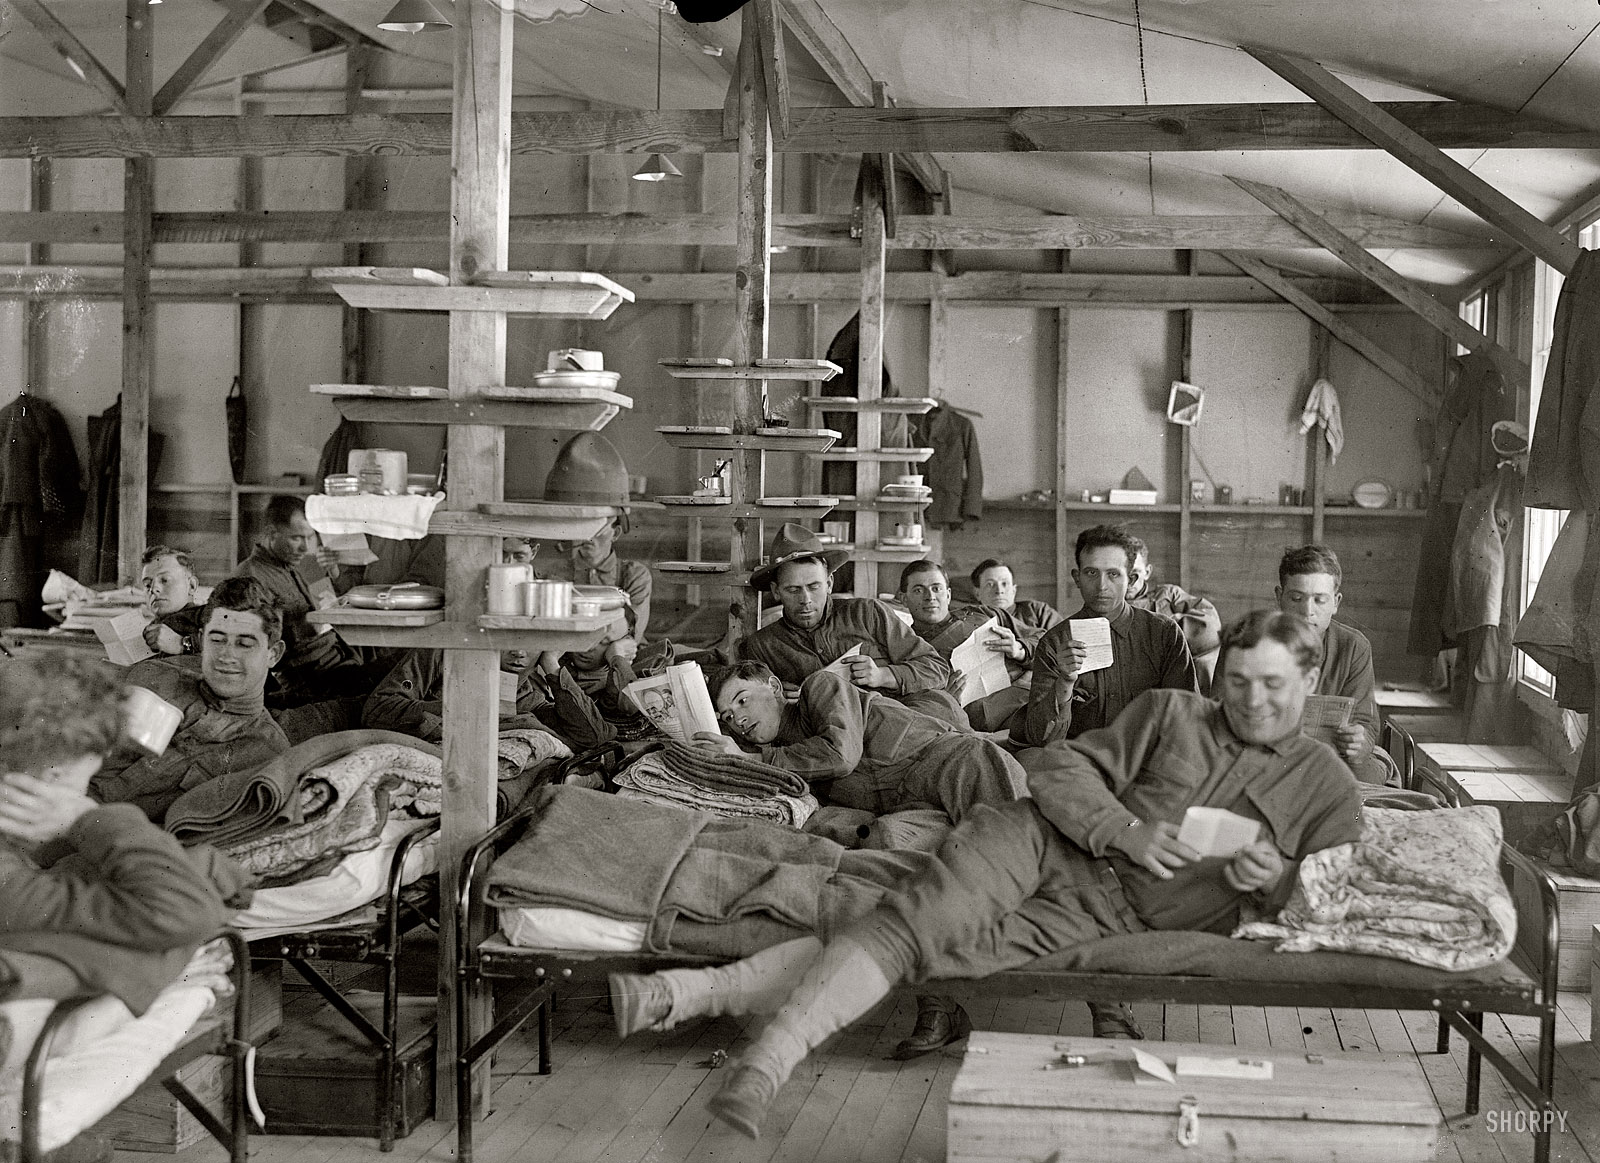 "1917. Camp Meade, Maryland. Winter views." At ease in the barracks with news from the folks. Harris & Ewing Collection glass negative. View full size.